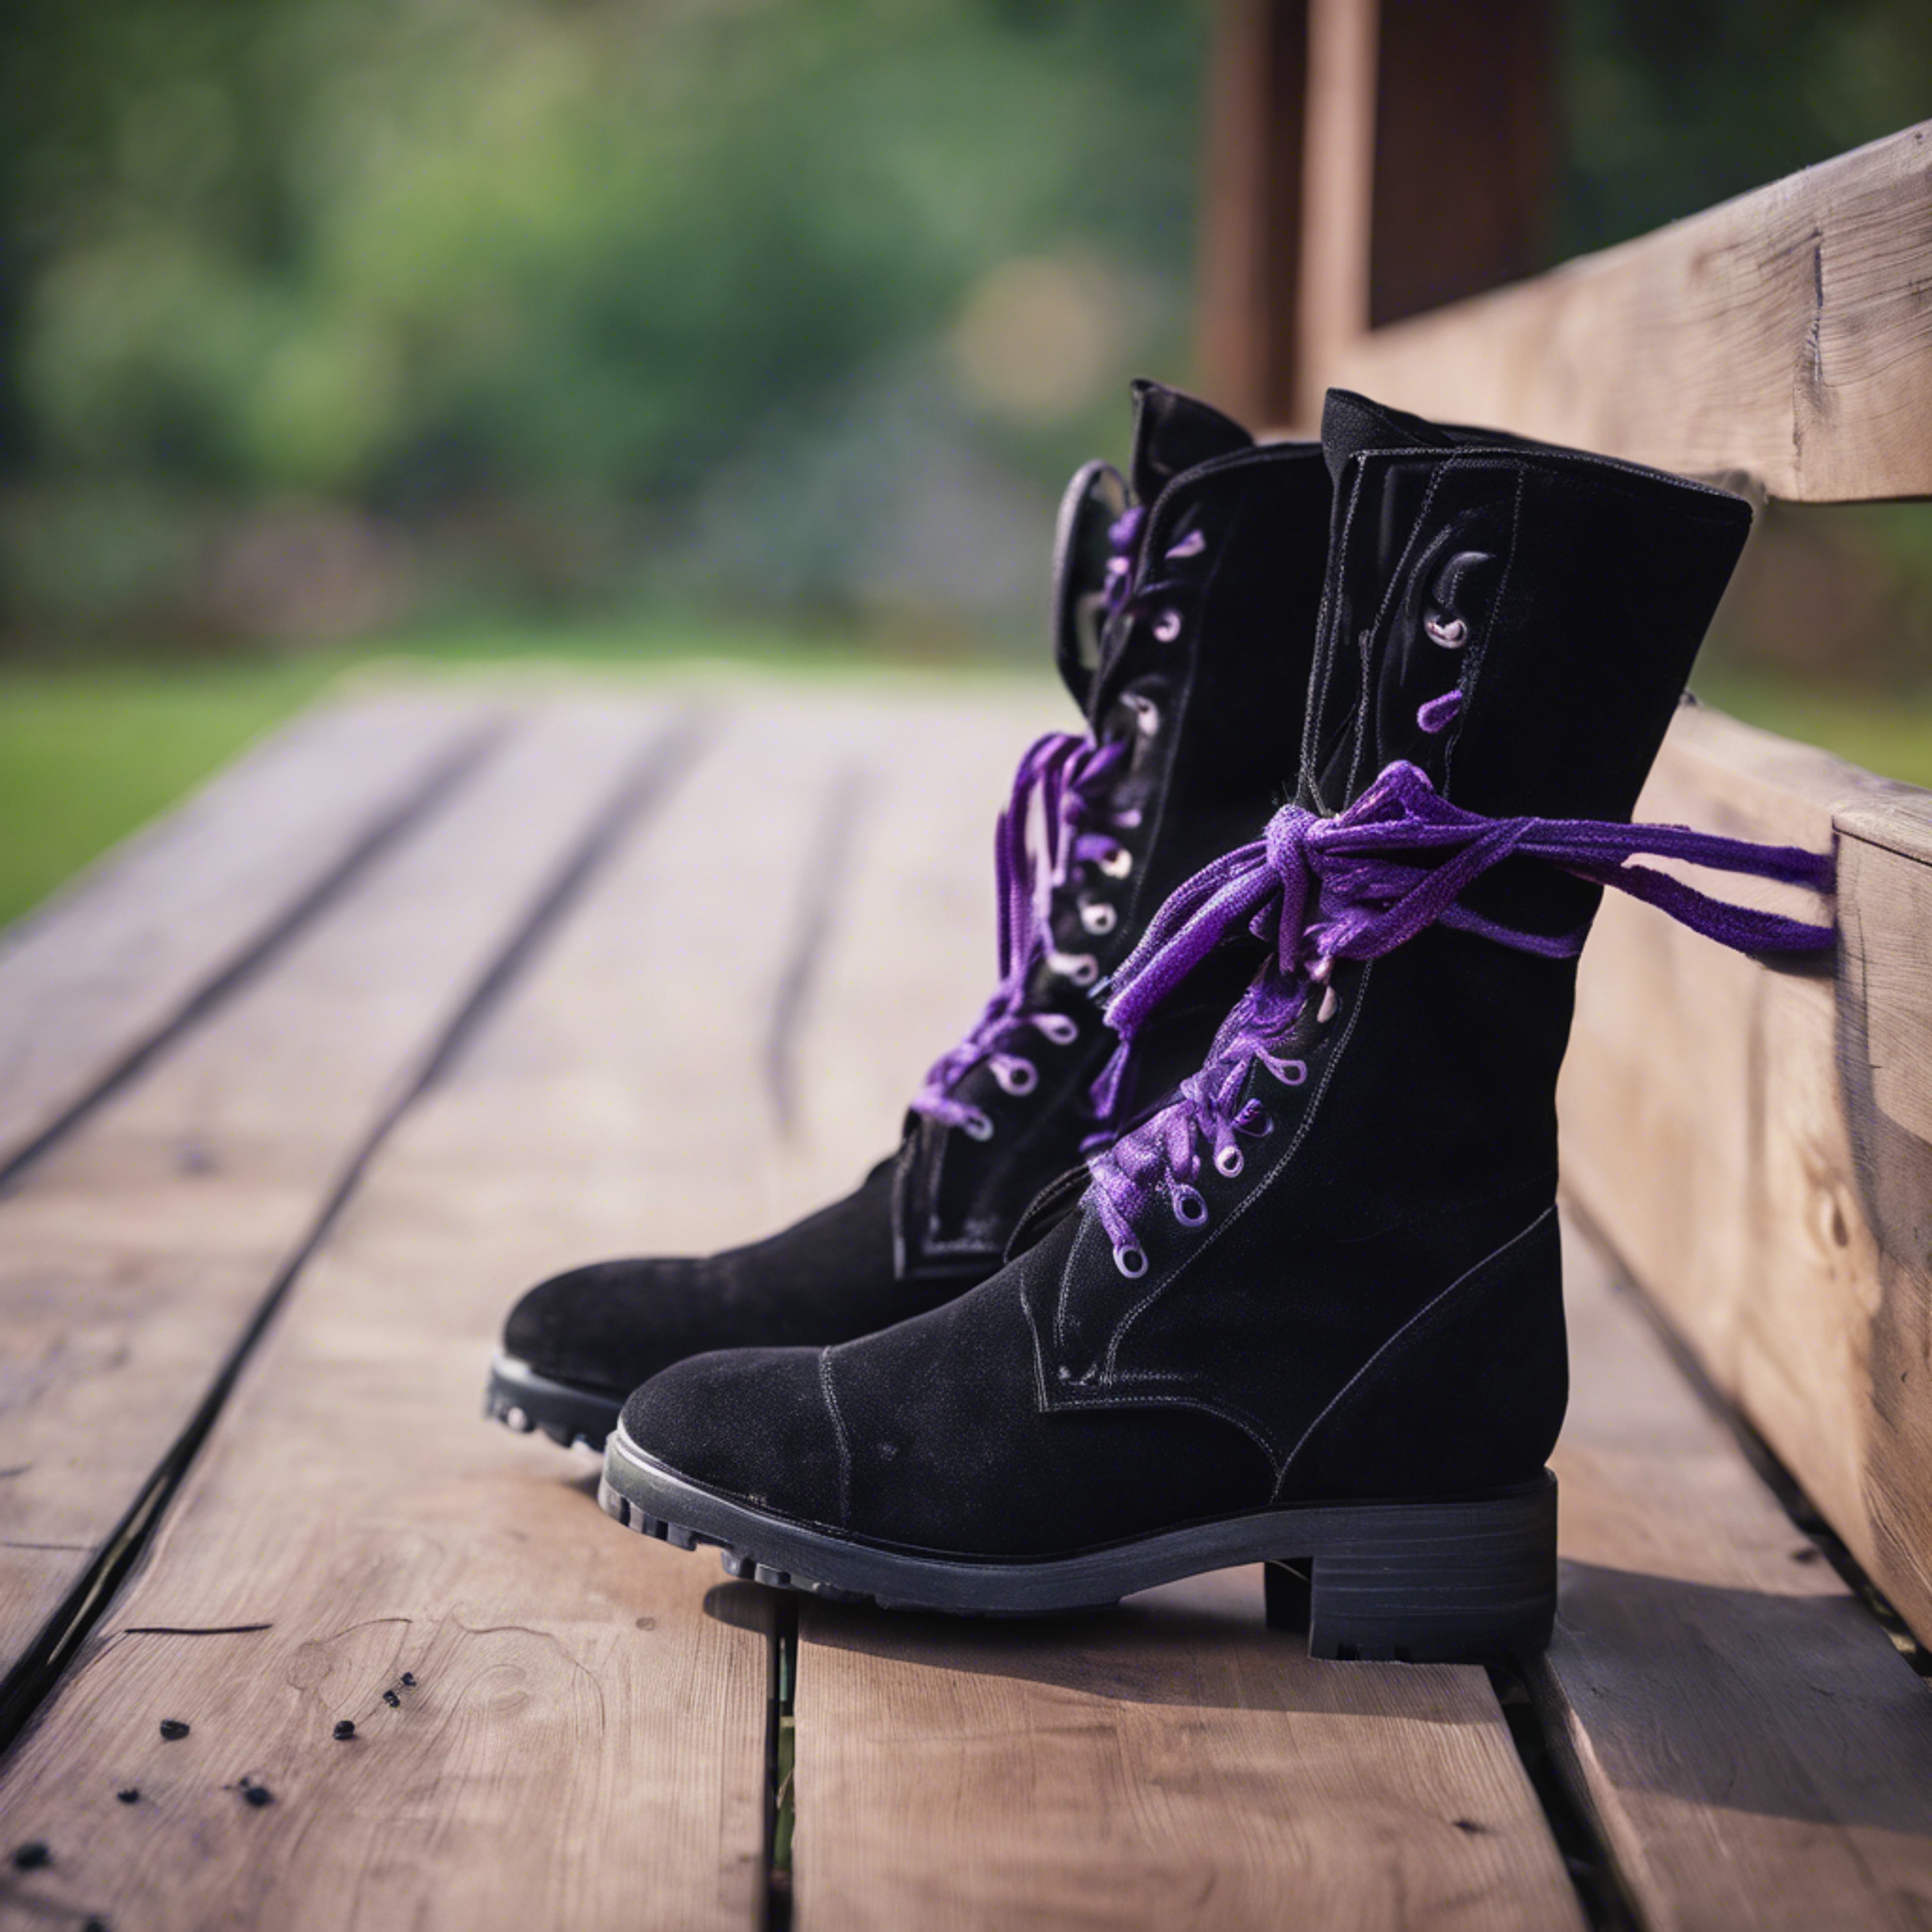 A pair of black suede boots with purple laces left casually on a wooden porch. ផ្ទាំង​រូបភាព[fedd81ee4b6b40088ba0]